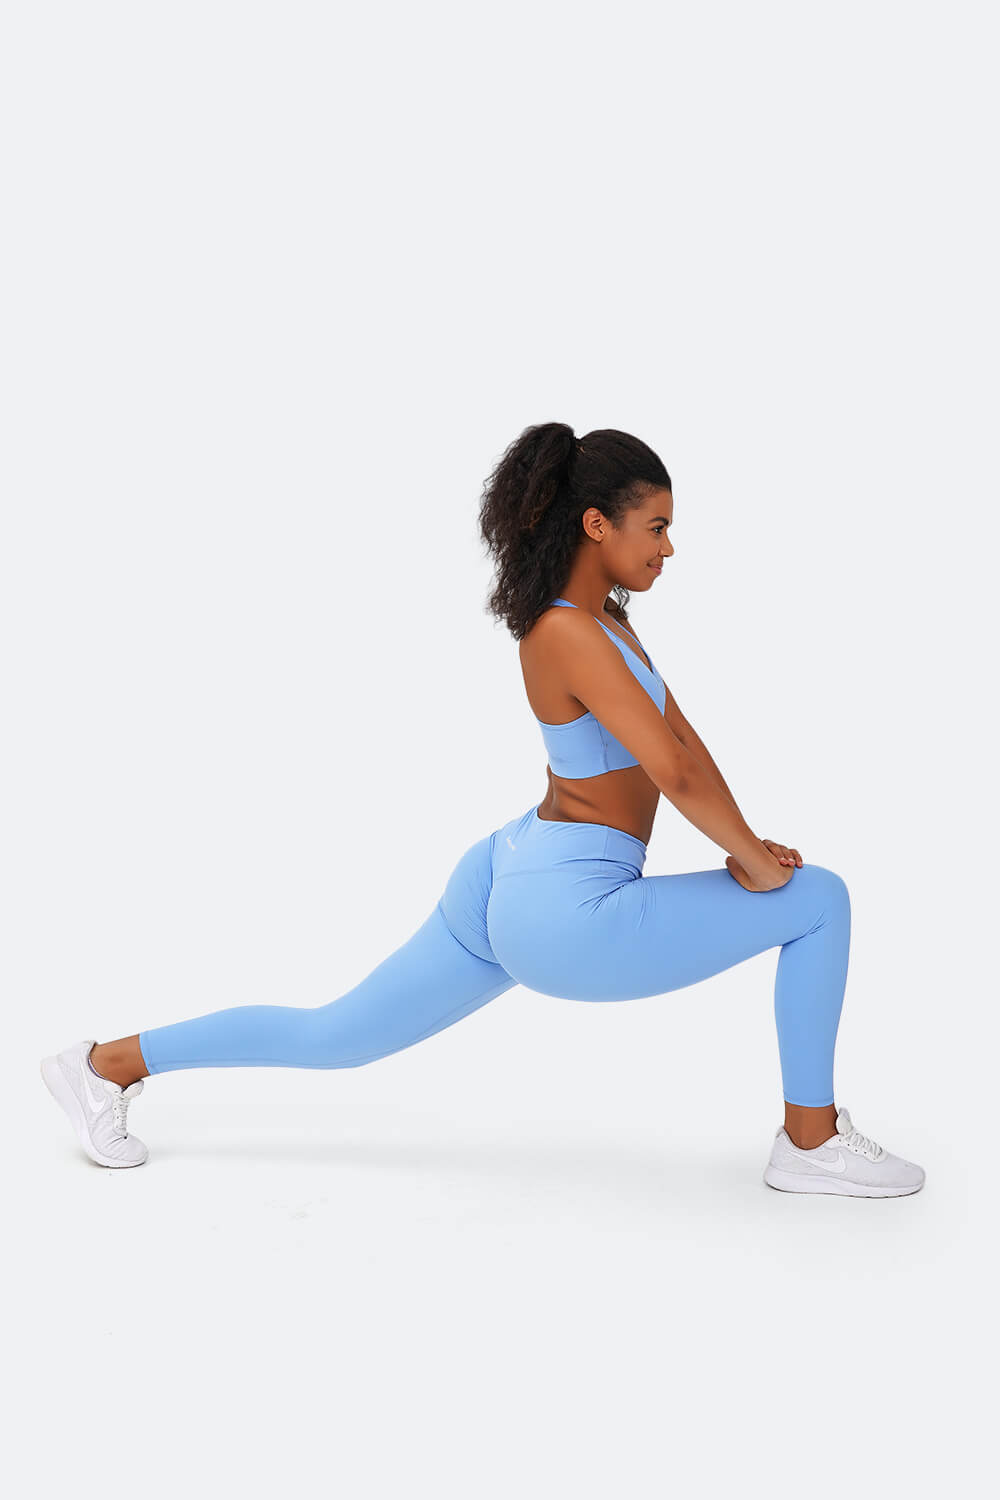 BetterMe High Waisted Leggings and Supportive Bra Set in Blue